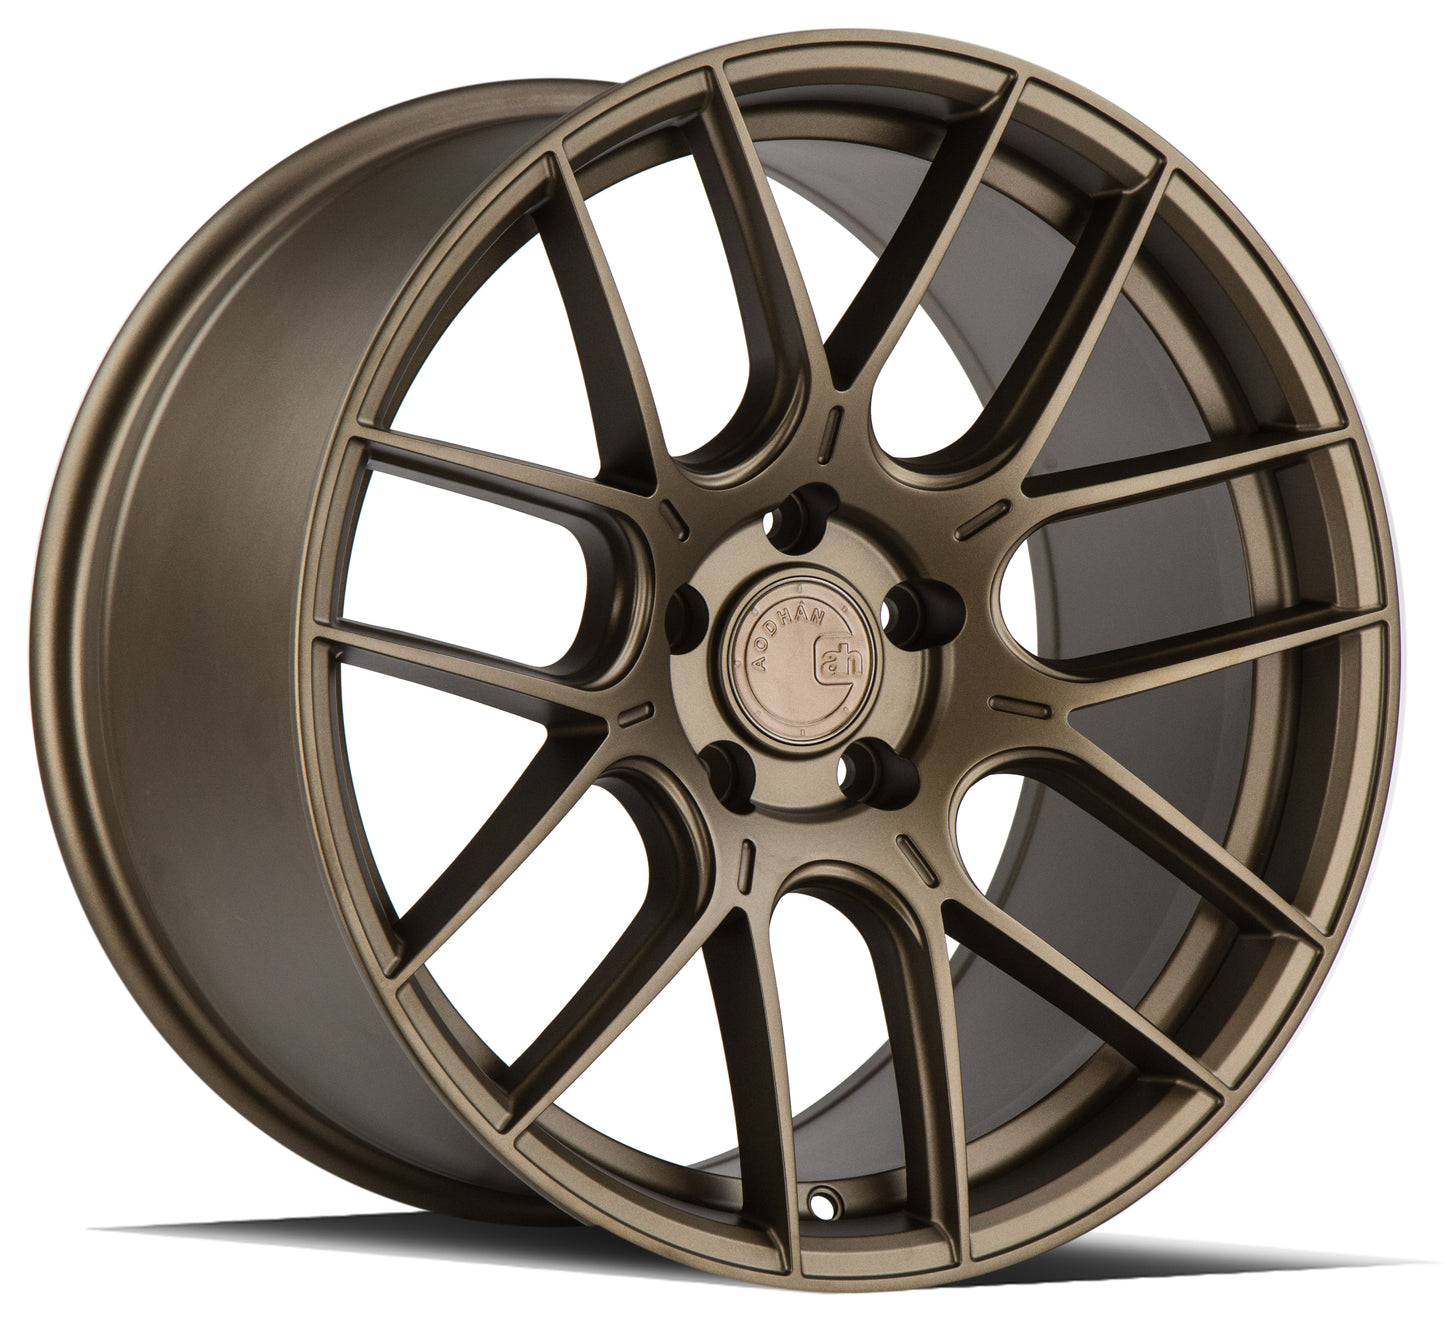 18" Aodhan AHX Matte Bronze 5x120 ( Staggered Setup ) ( Set of 4 )